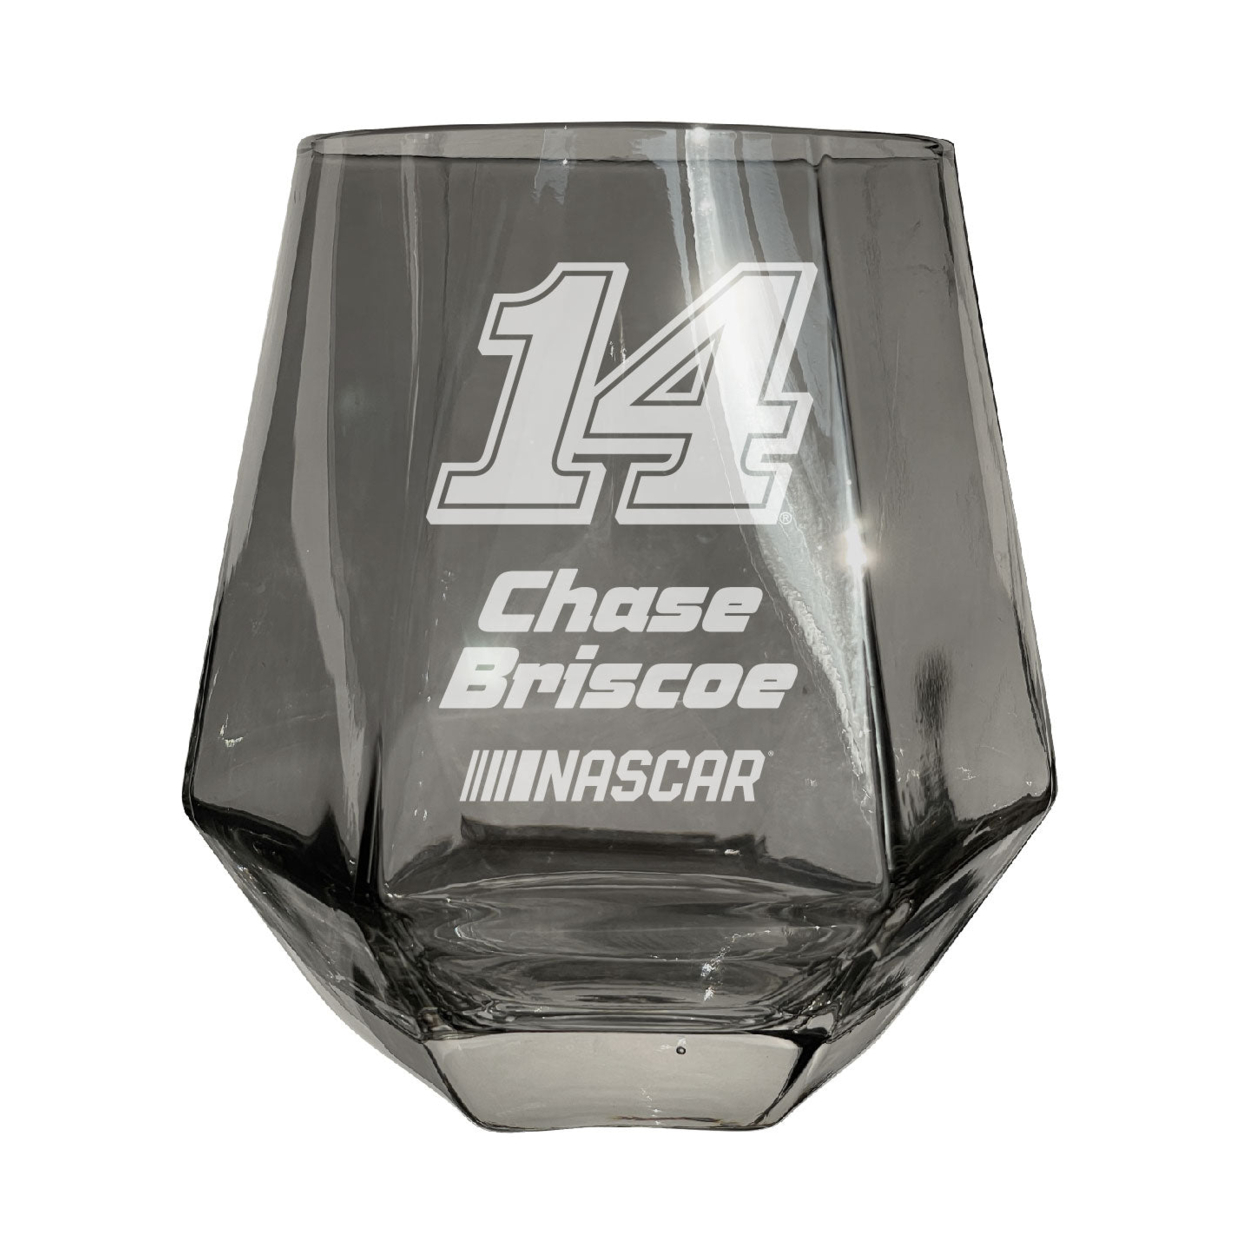 #14 Chase Briscoe Officially Licensed 10 Oz Engraved Diamond Wine Glass - Iridescent, 2-Pack